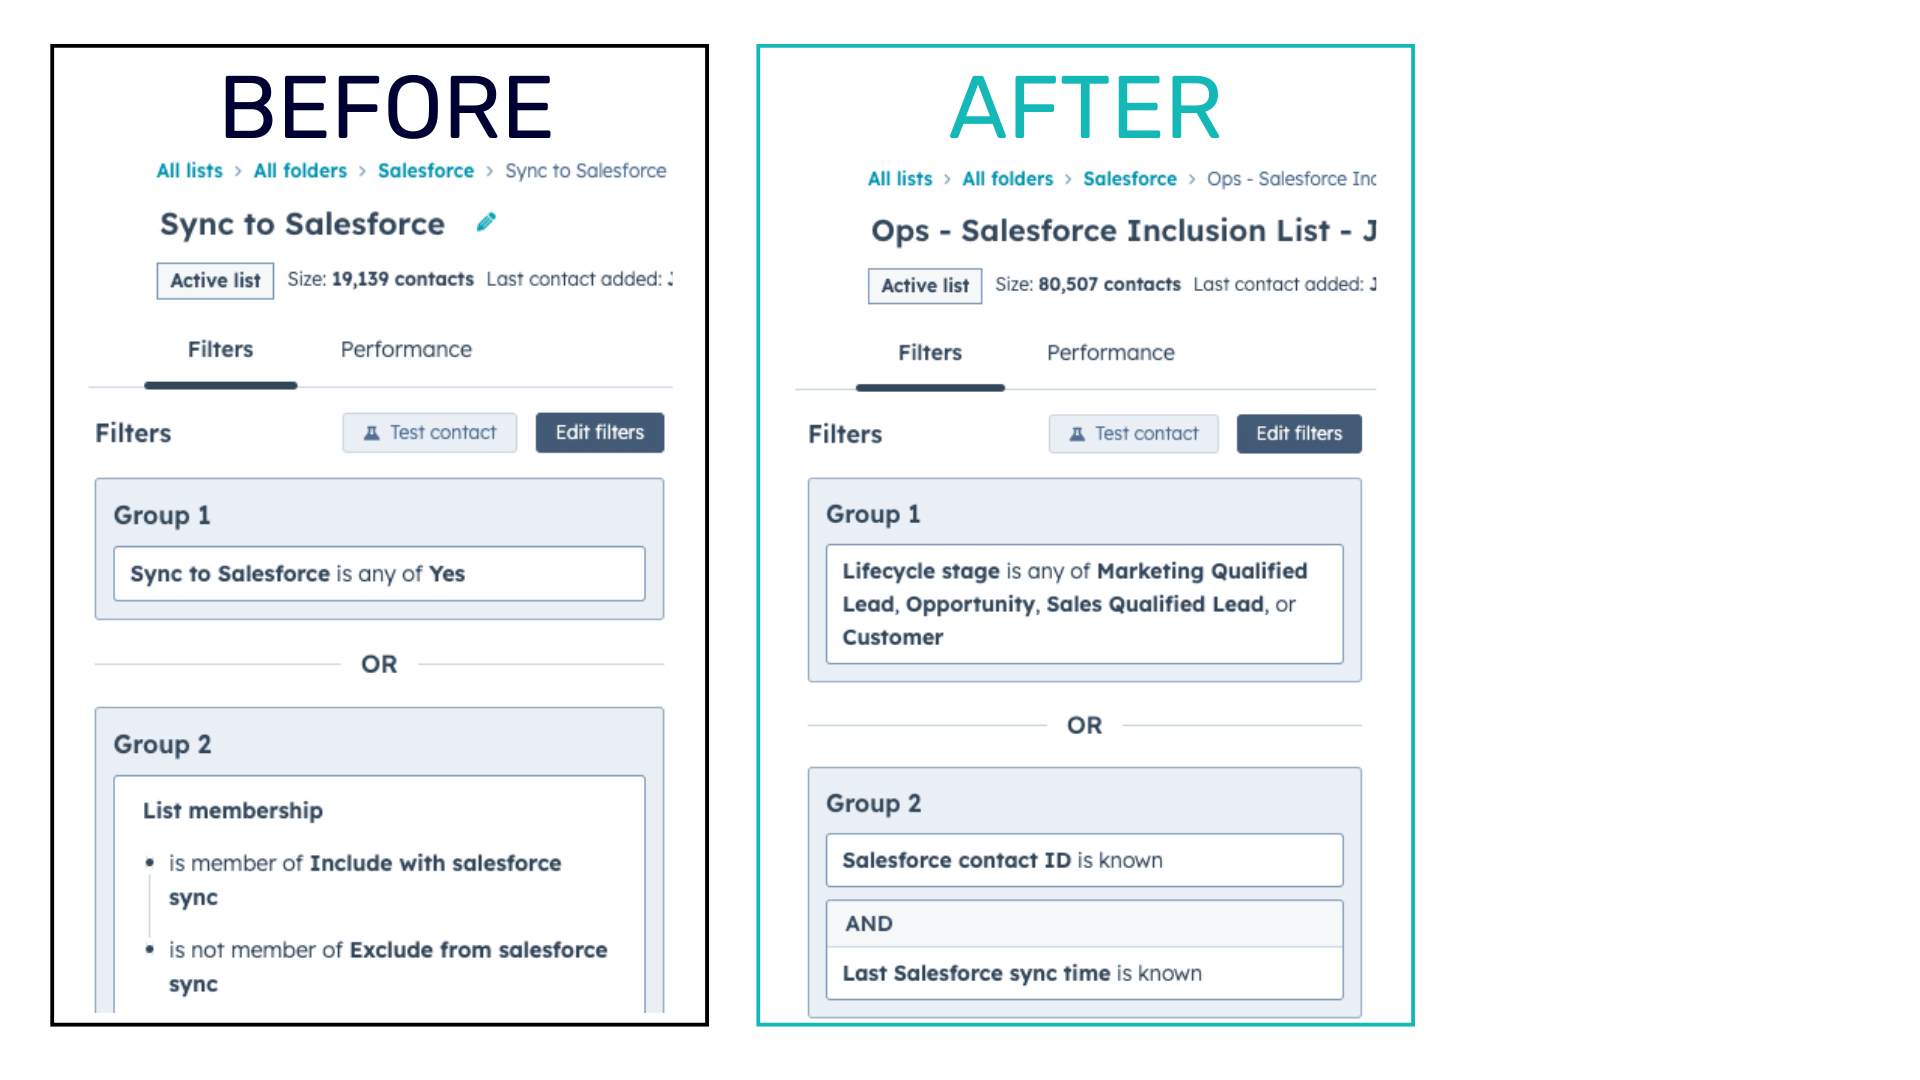 Omni - Salesforce Inclusion List Before & After